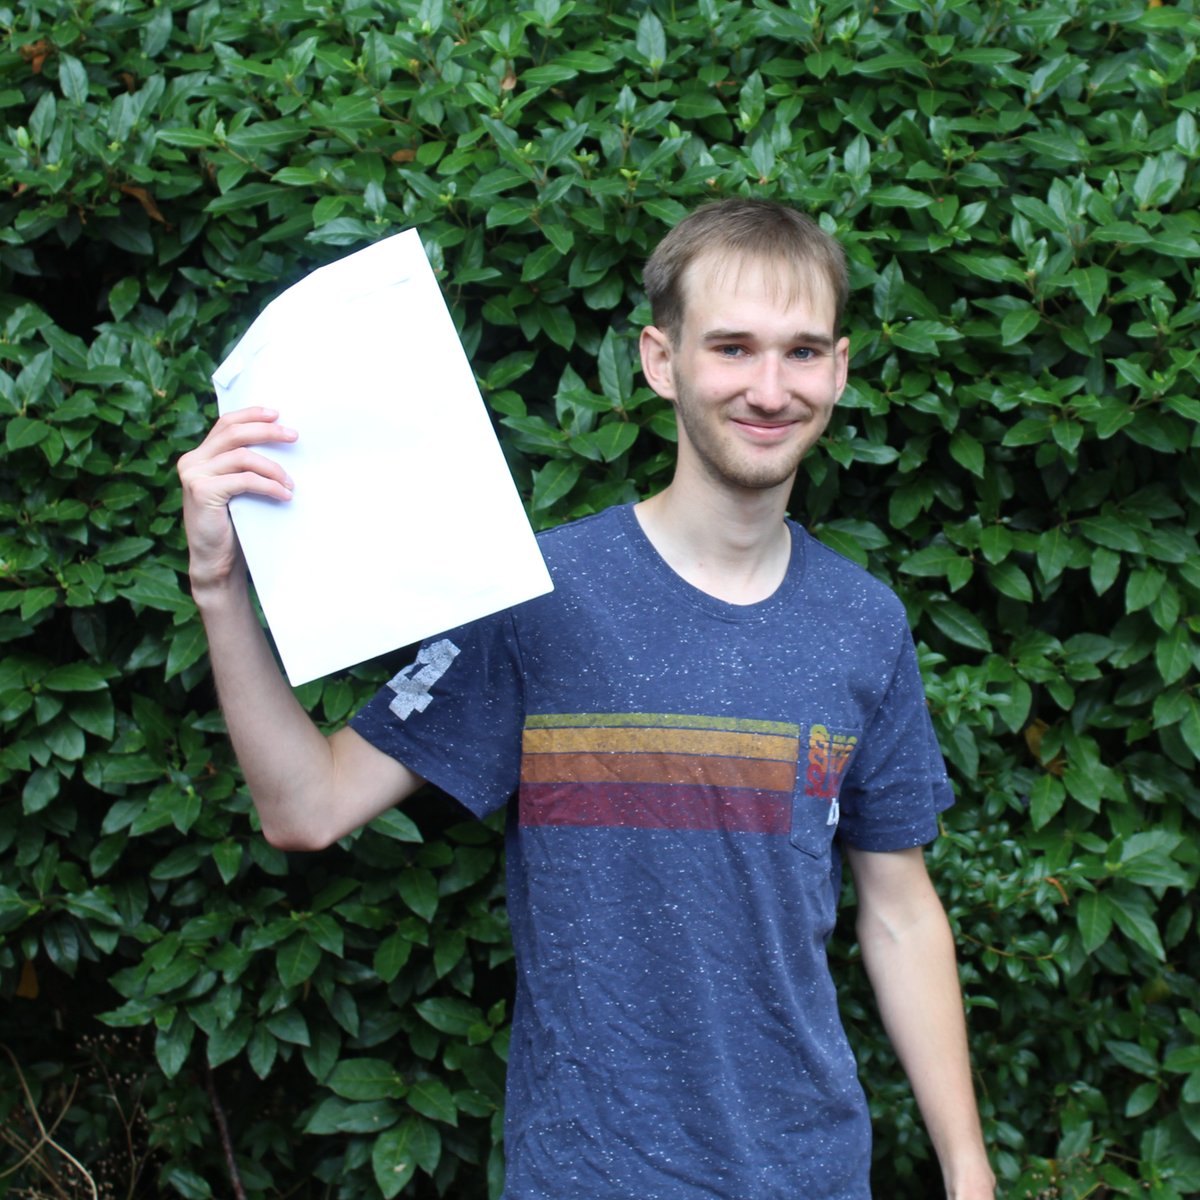 Several of our students are off to the @unisouthampton including Charlie, who achieved A* A A A and a B in the EPQ and will read Economics and Finance, and Austin who achieved A, A B and will study Aeronautics and Astronautics. Well done!